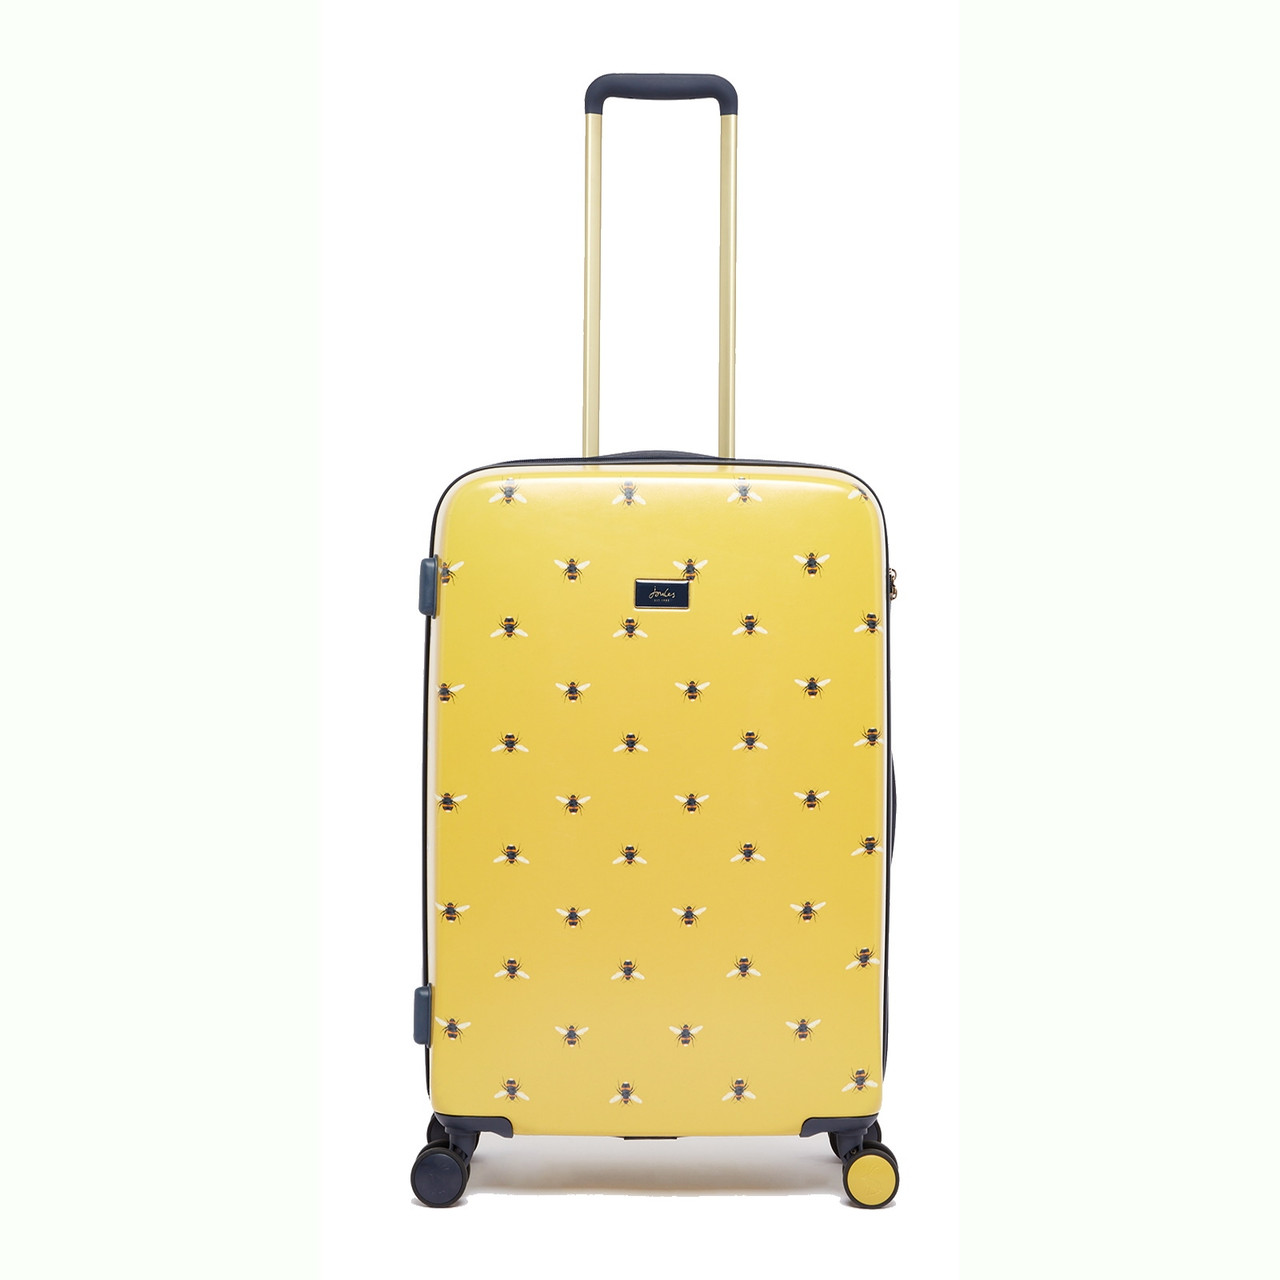 Joules Hard Side 4 Wheel Medium 66cm Suitcase at Luggage Superstore